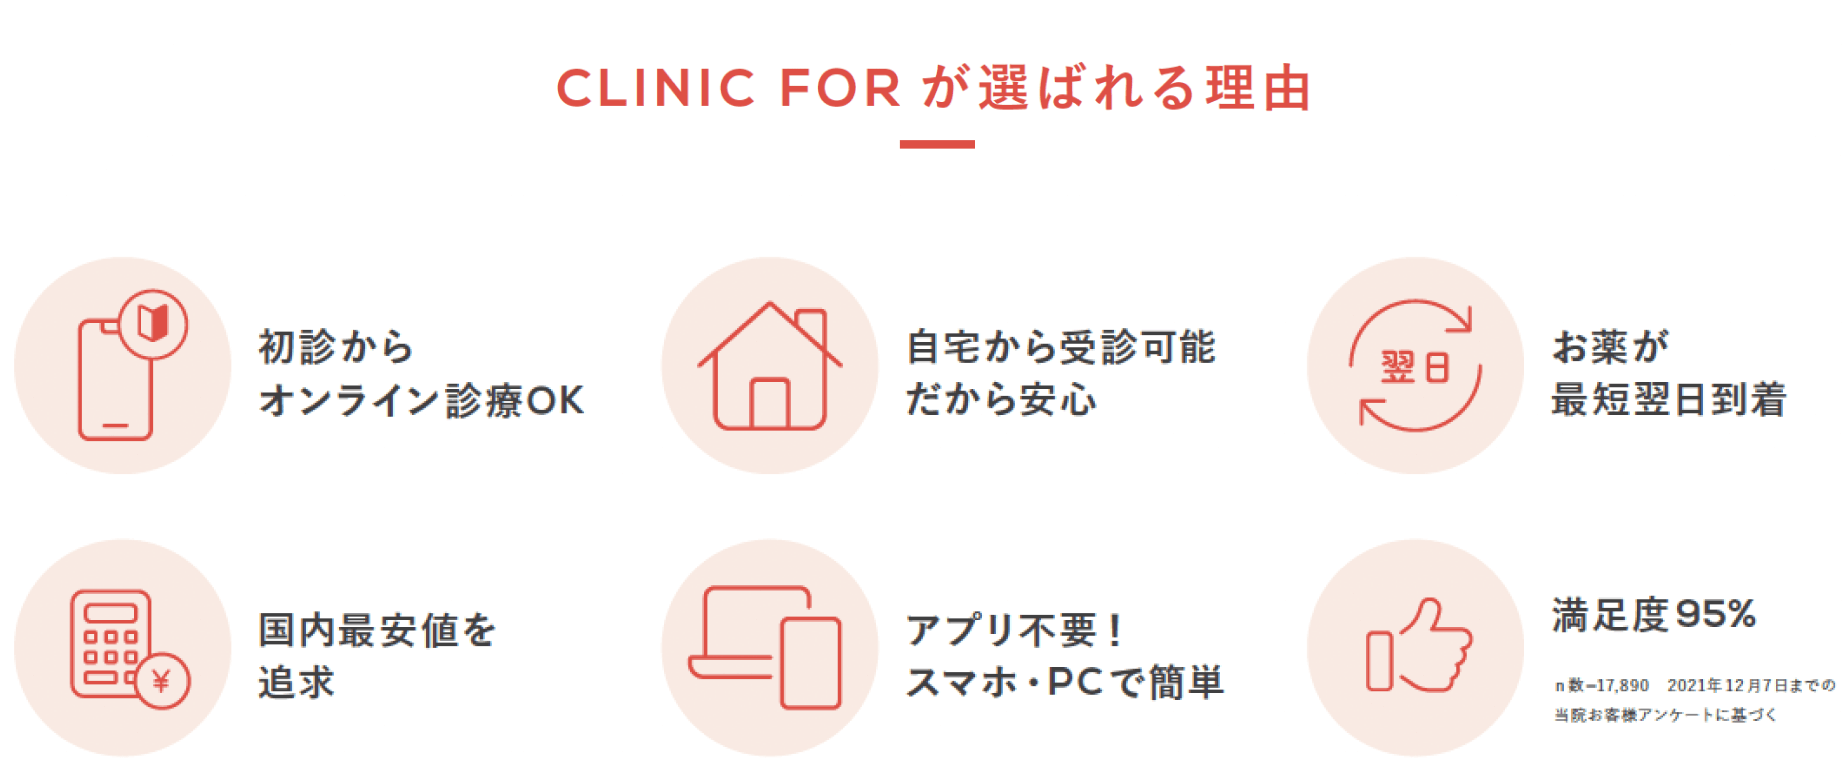 CLINIC FORが選ばれる理由